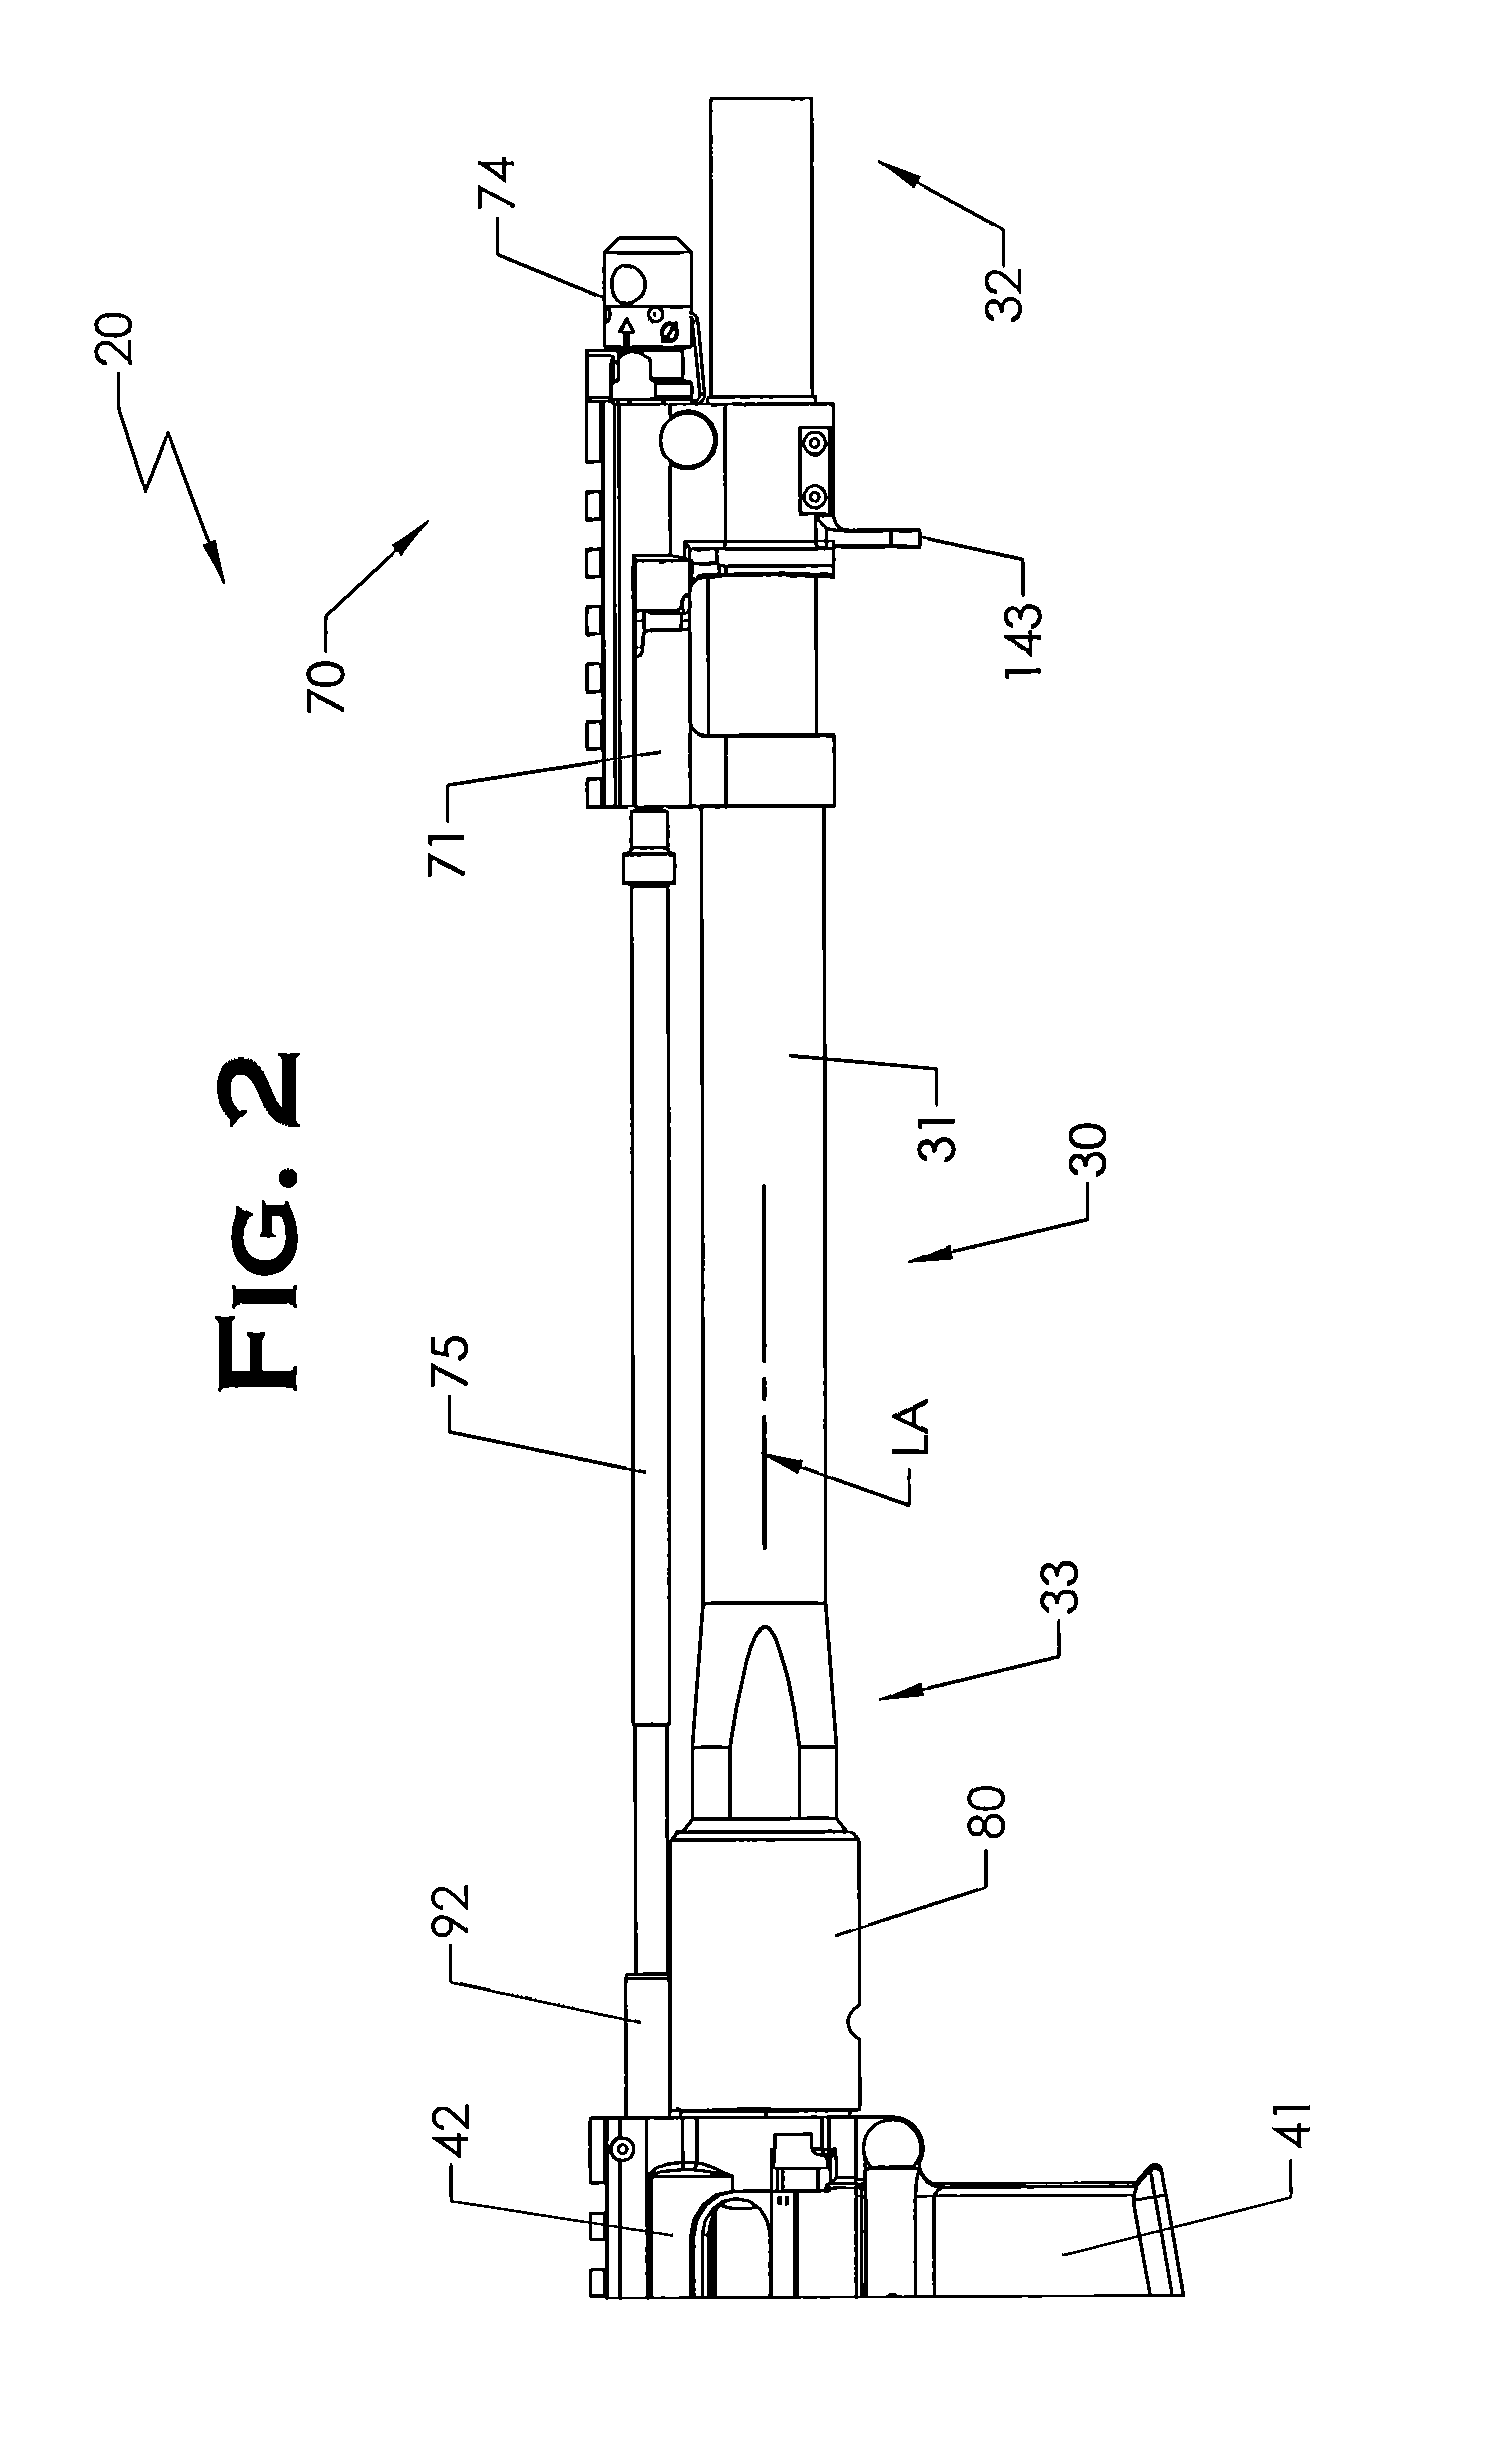 Firearm with quick coupling barrel system